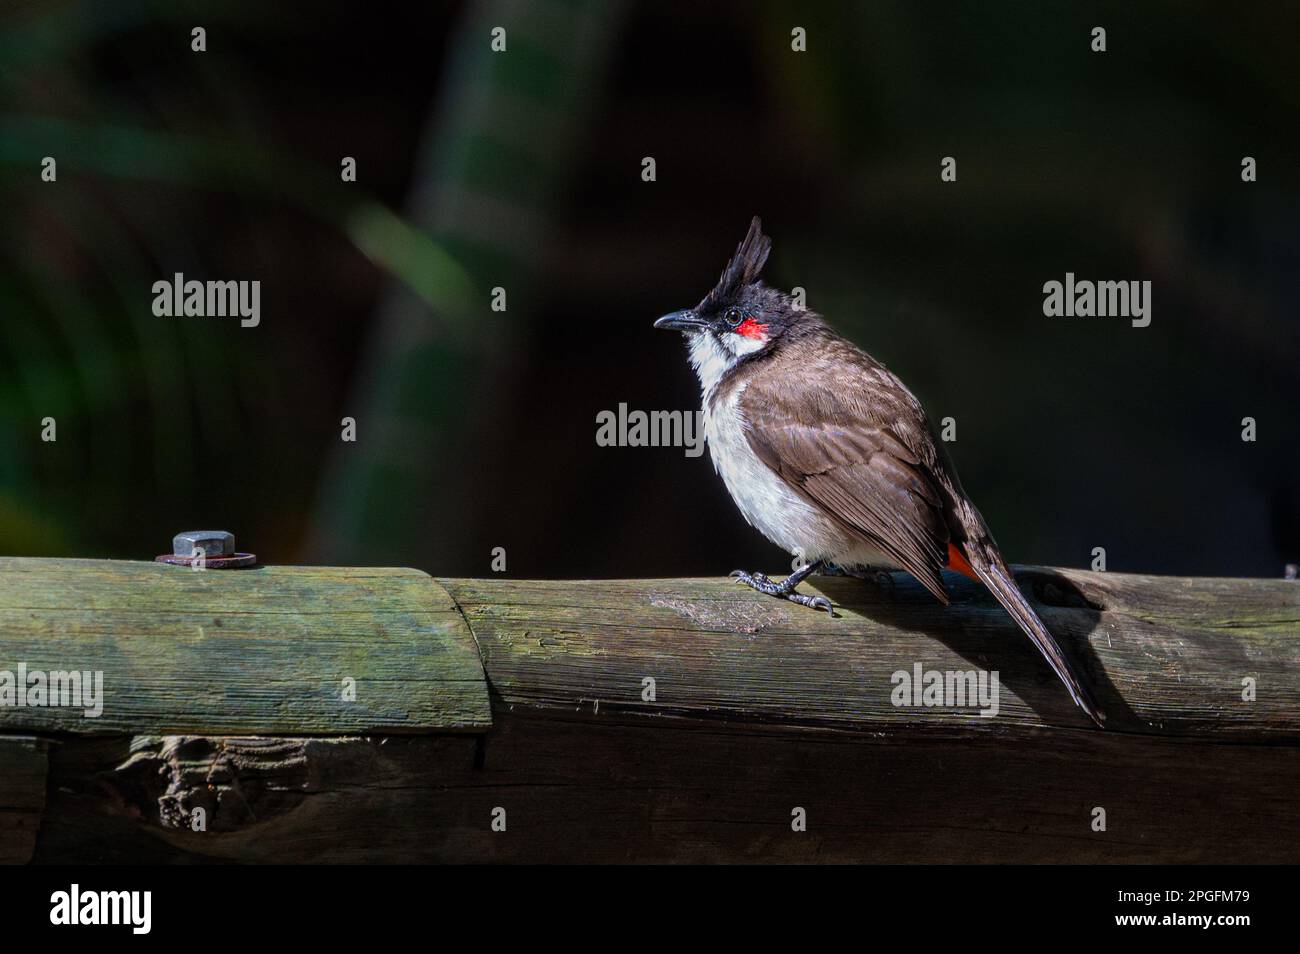 Red-whiskered bulbul, pycnonotus jocosus, perched on a wooden post, Mauritius Stock Photo